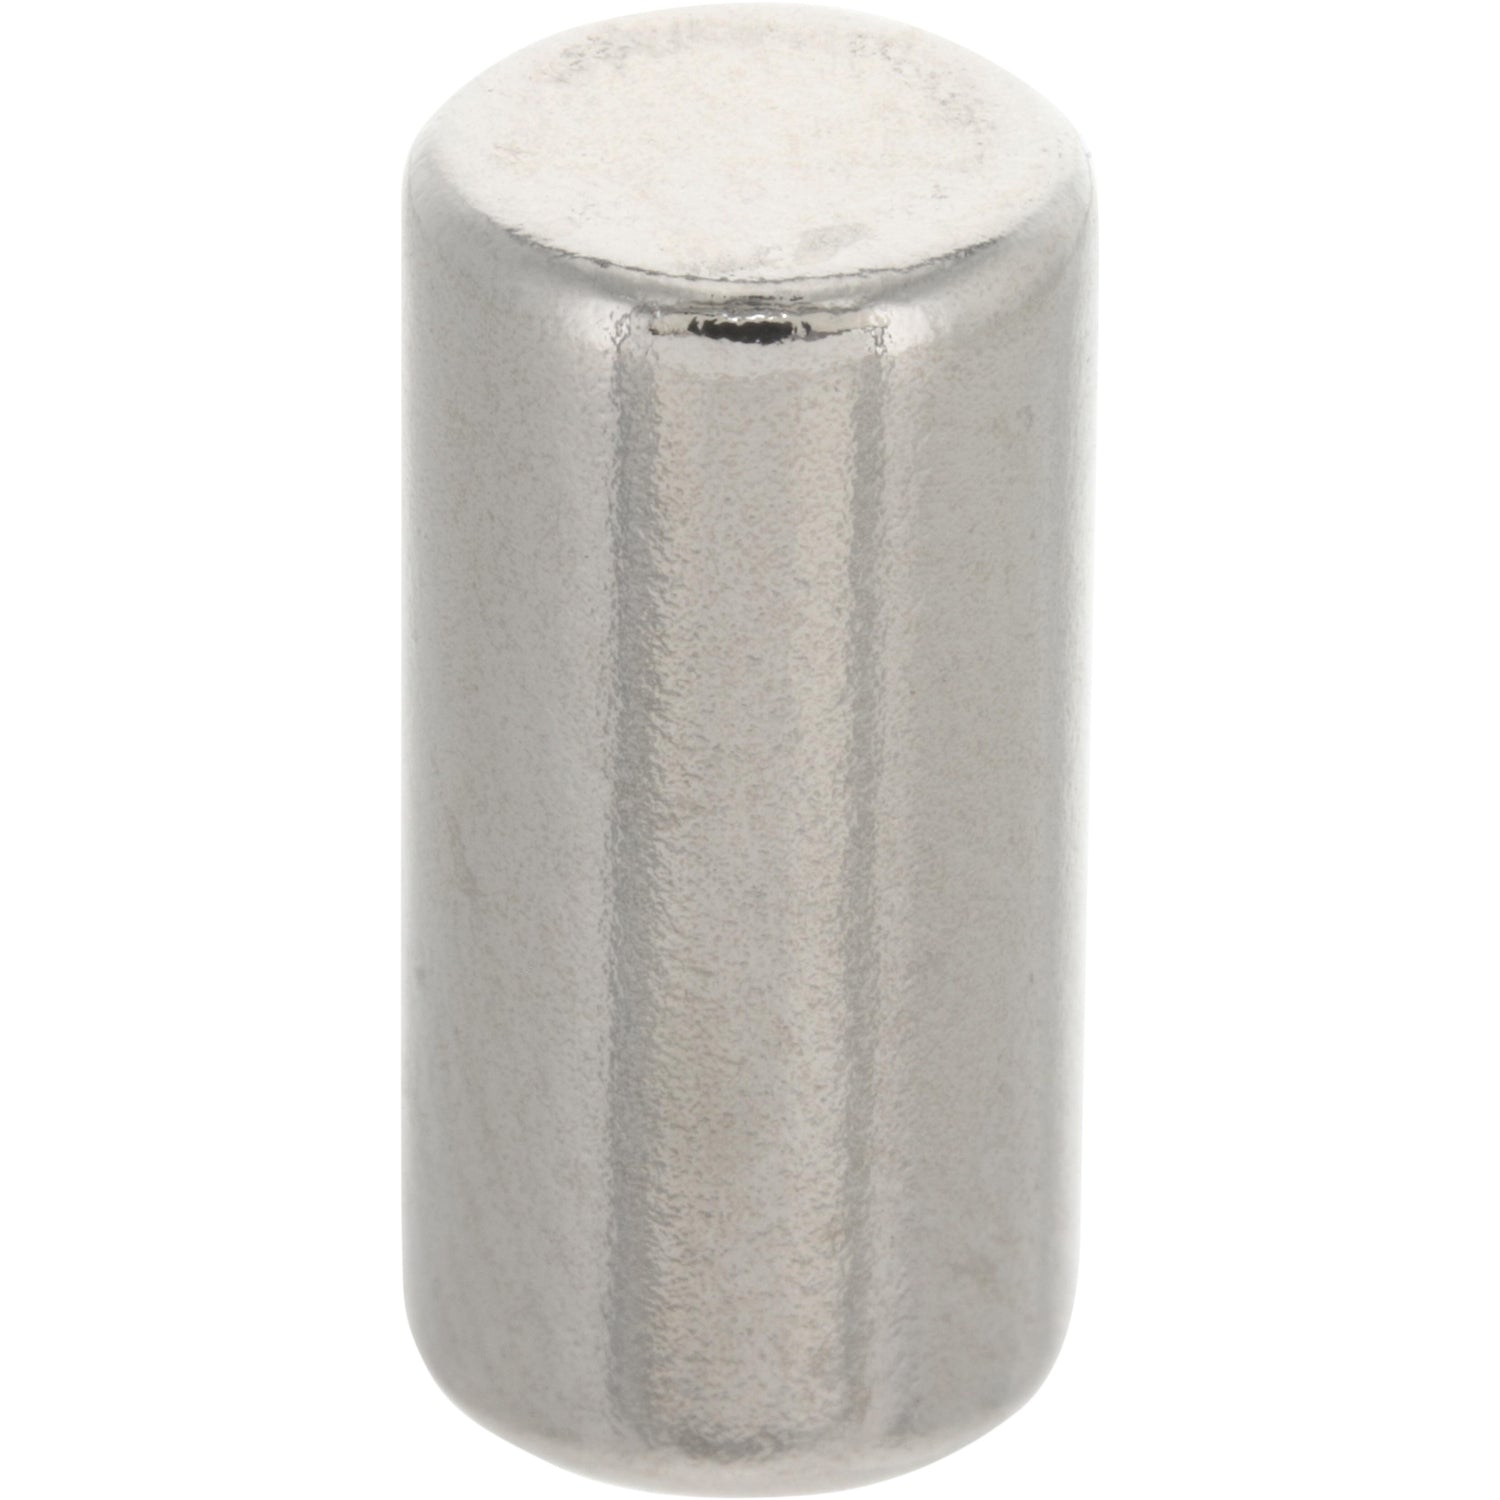 Highly reflective cylindrical magnet. 1/4" dia. x 1/2" thick. Magnet is shown on white background. 